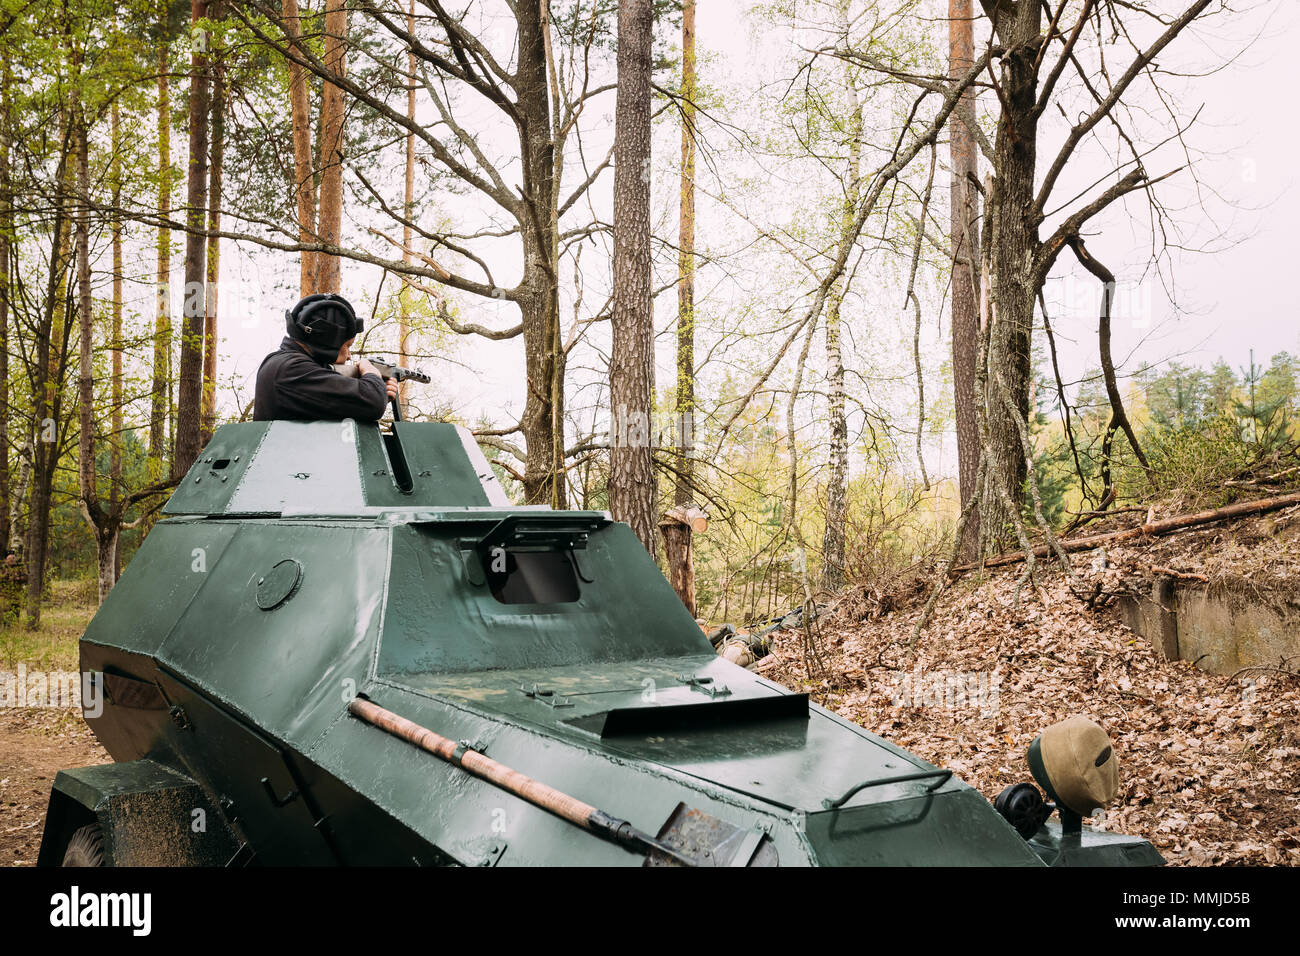 Re-enactor Dressed As Russian Soviet Crew Member Soldier Of World War II Sitting In Armoured Soviet Scout Car BA-64 In Forest And Aiming a Sub-machine Stock Photo